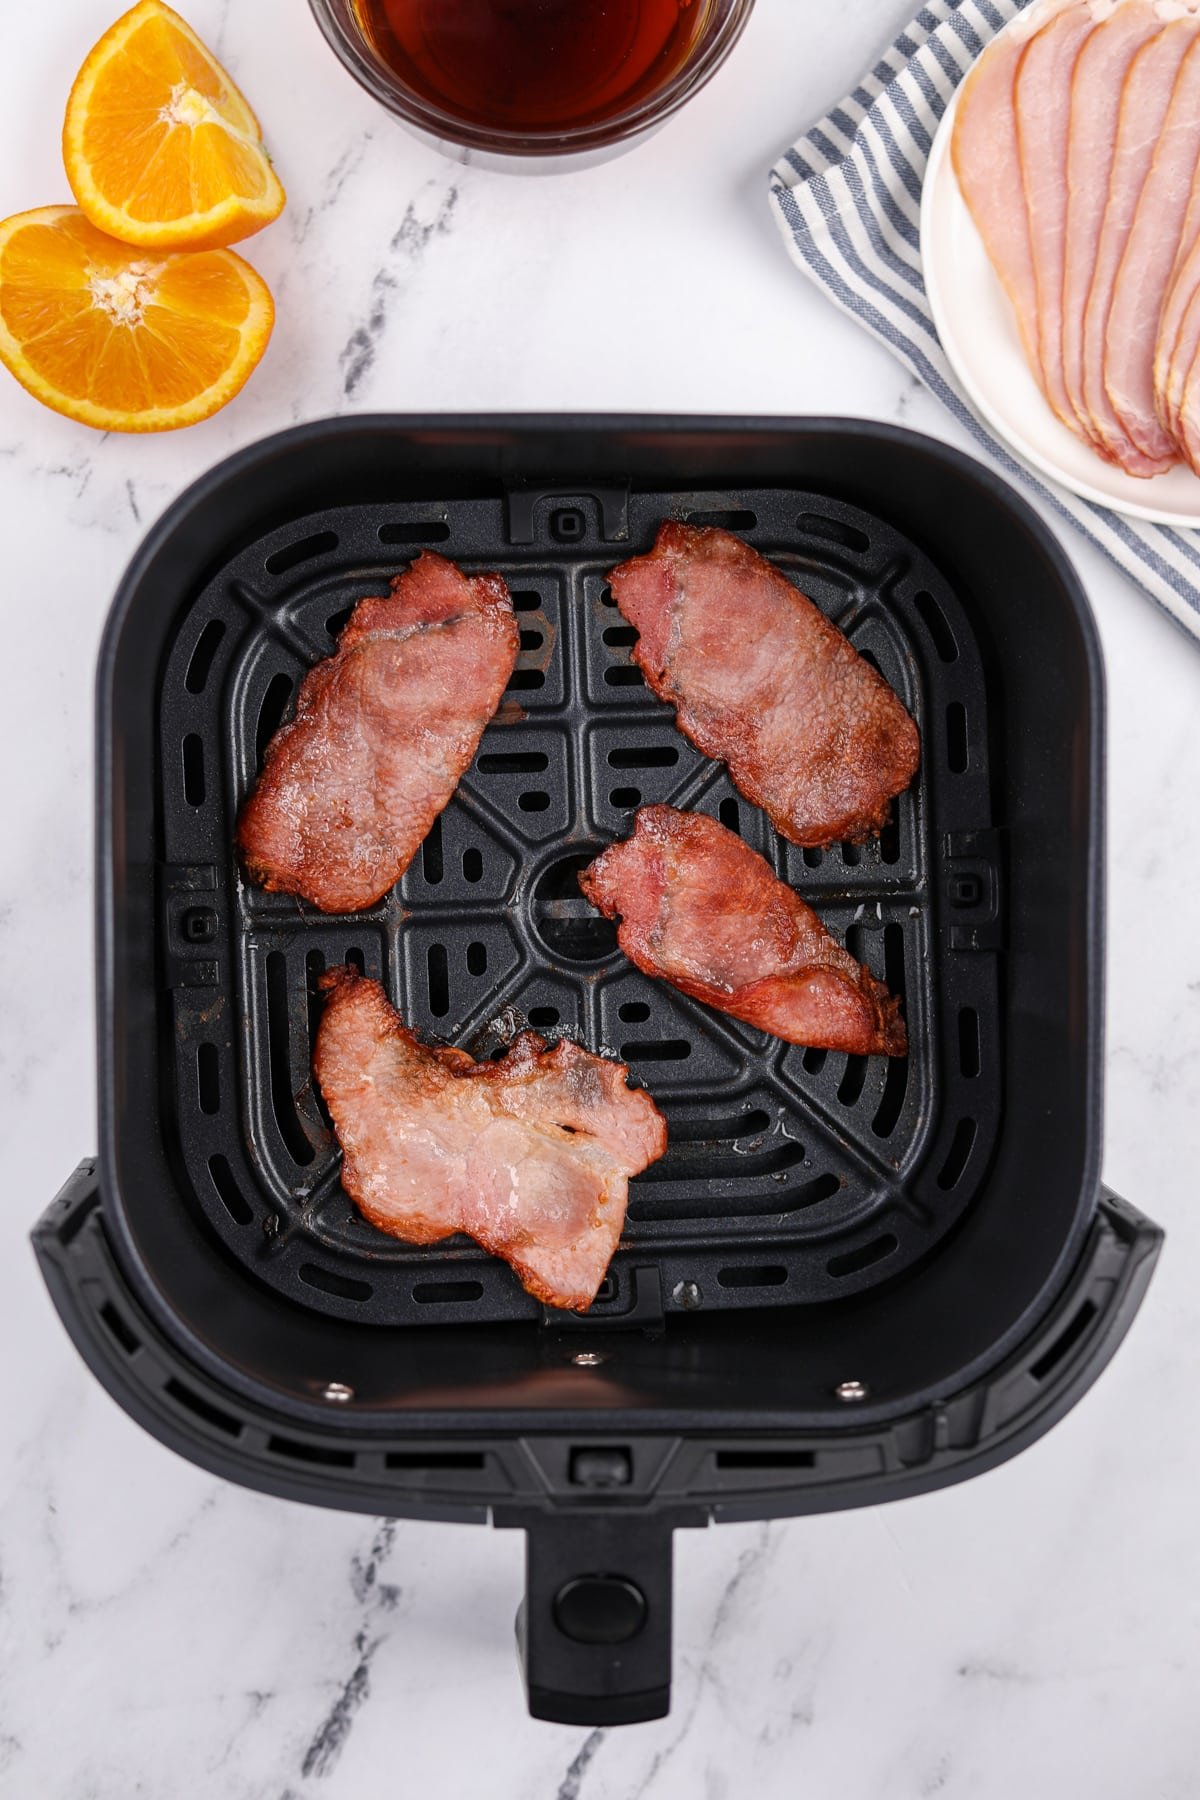 An air fryer basket with four slices of cooked back bacon inside.